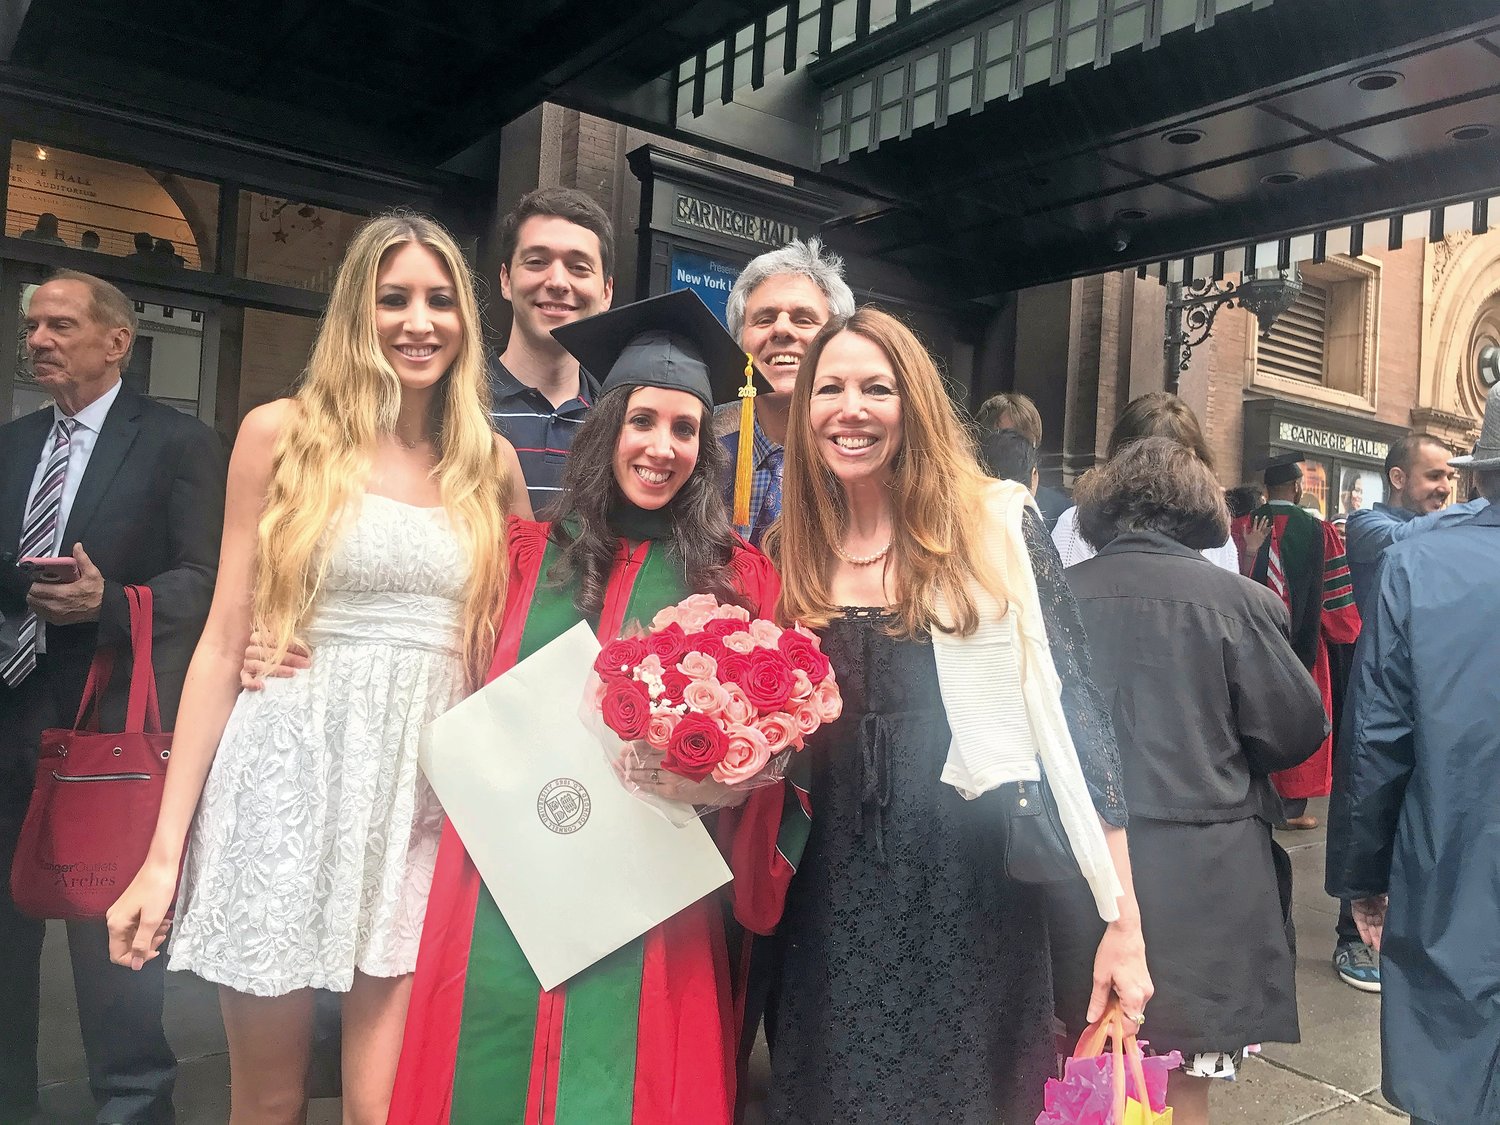 Berman’s medical school graduation in 2018 with her parents Pamela and Martin, sister Genny, and now husband, Glenn.